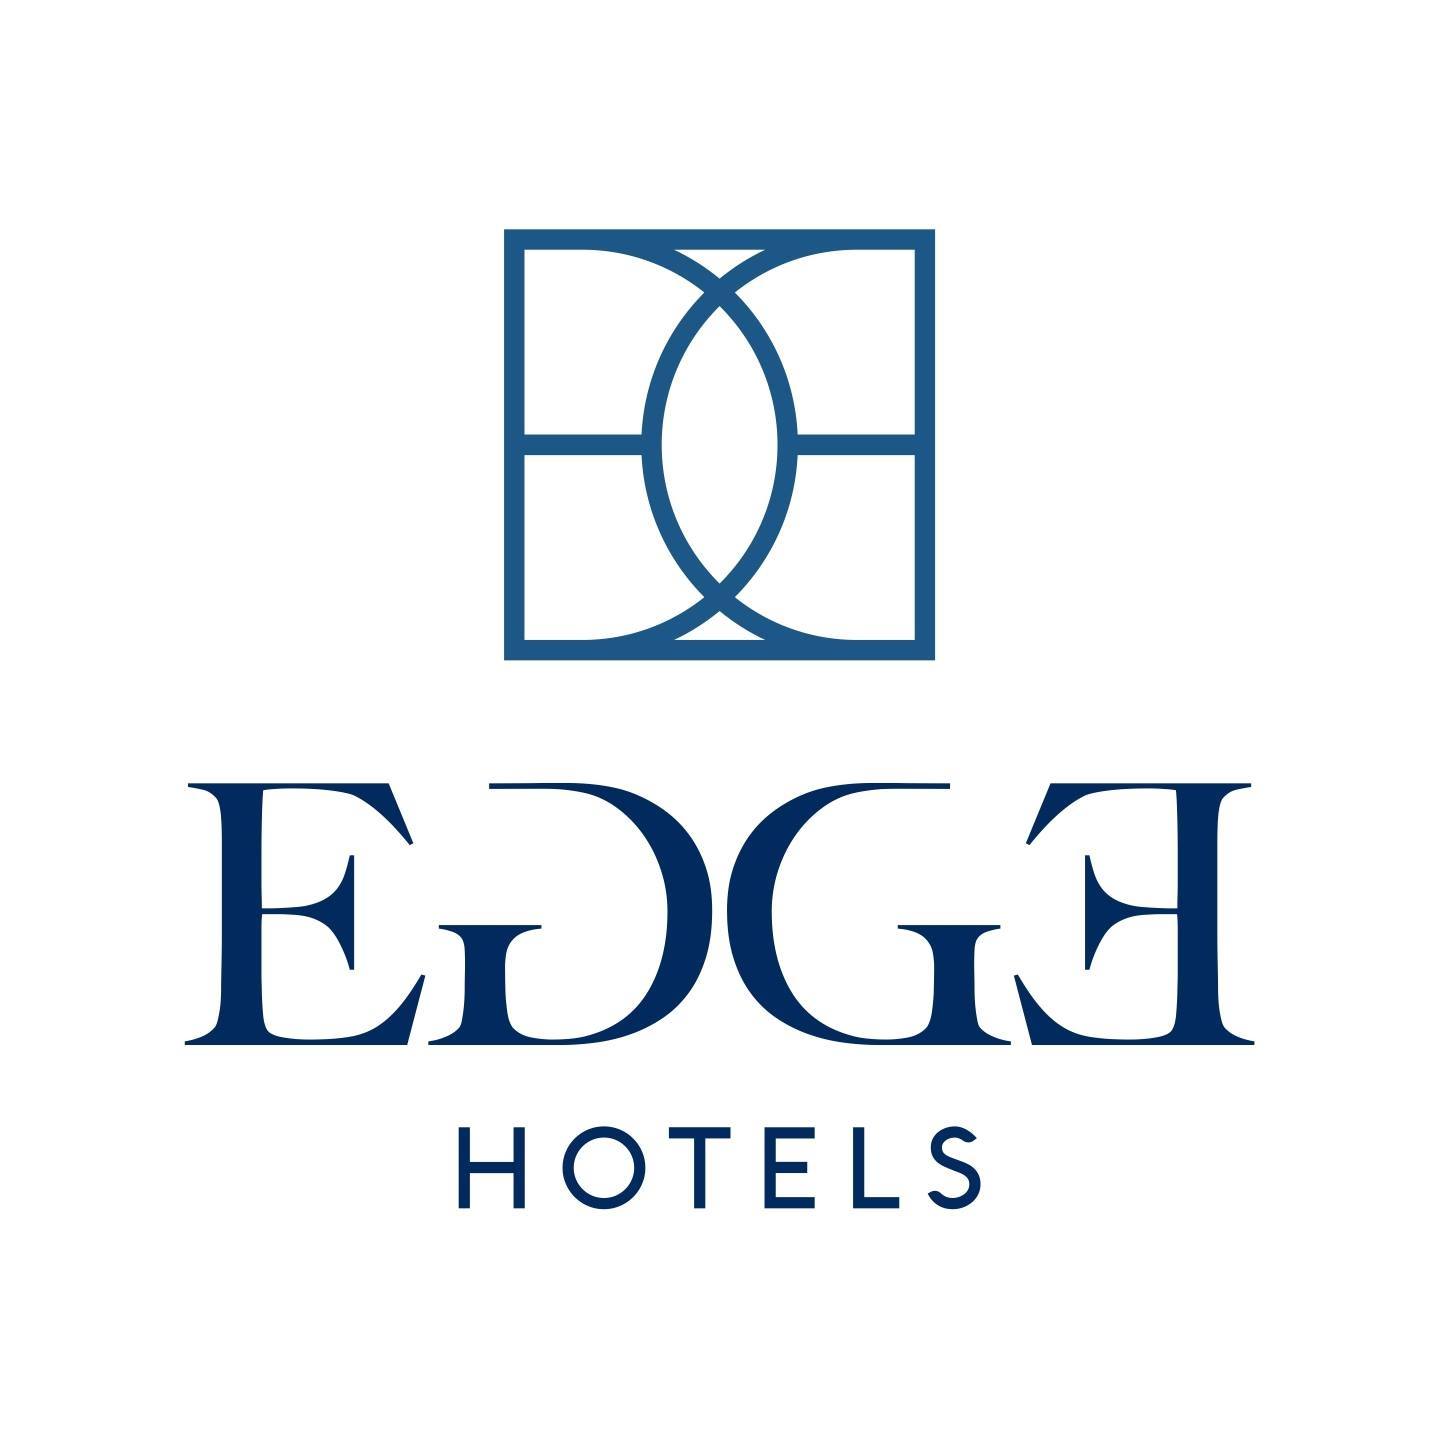 Image result for EDGE HOTELS